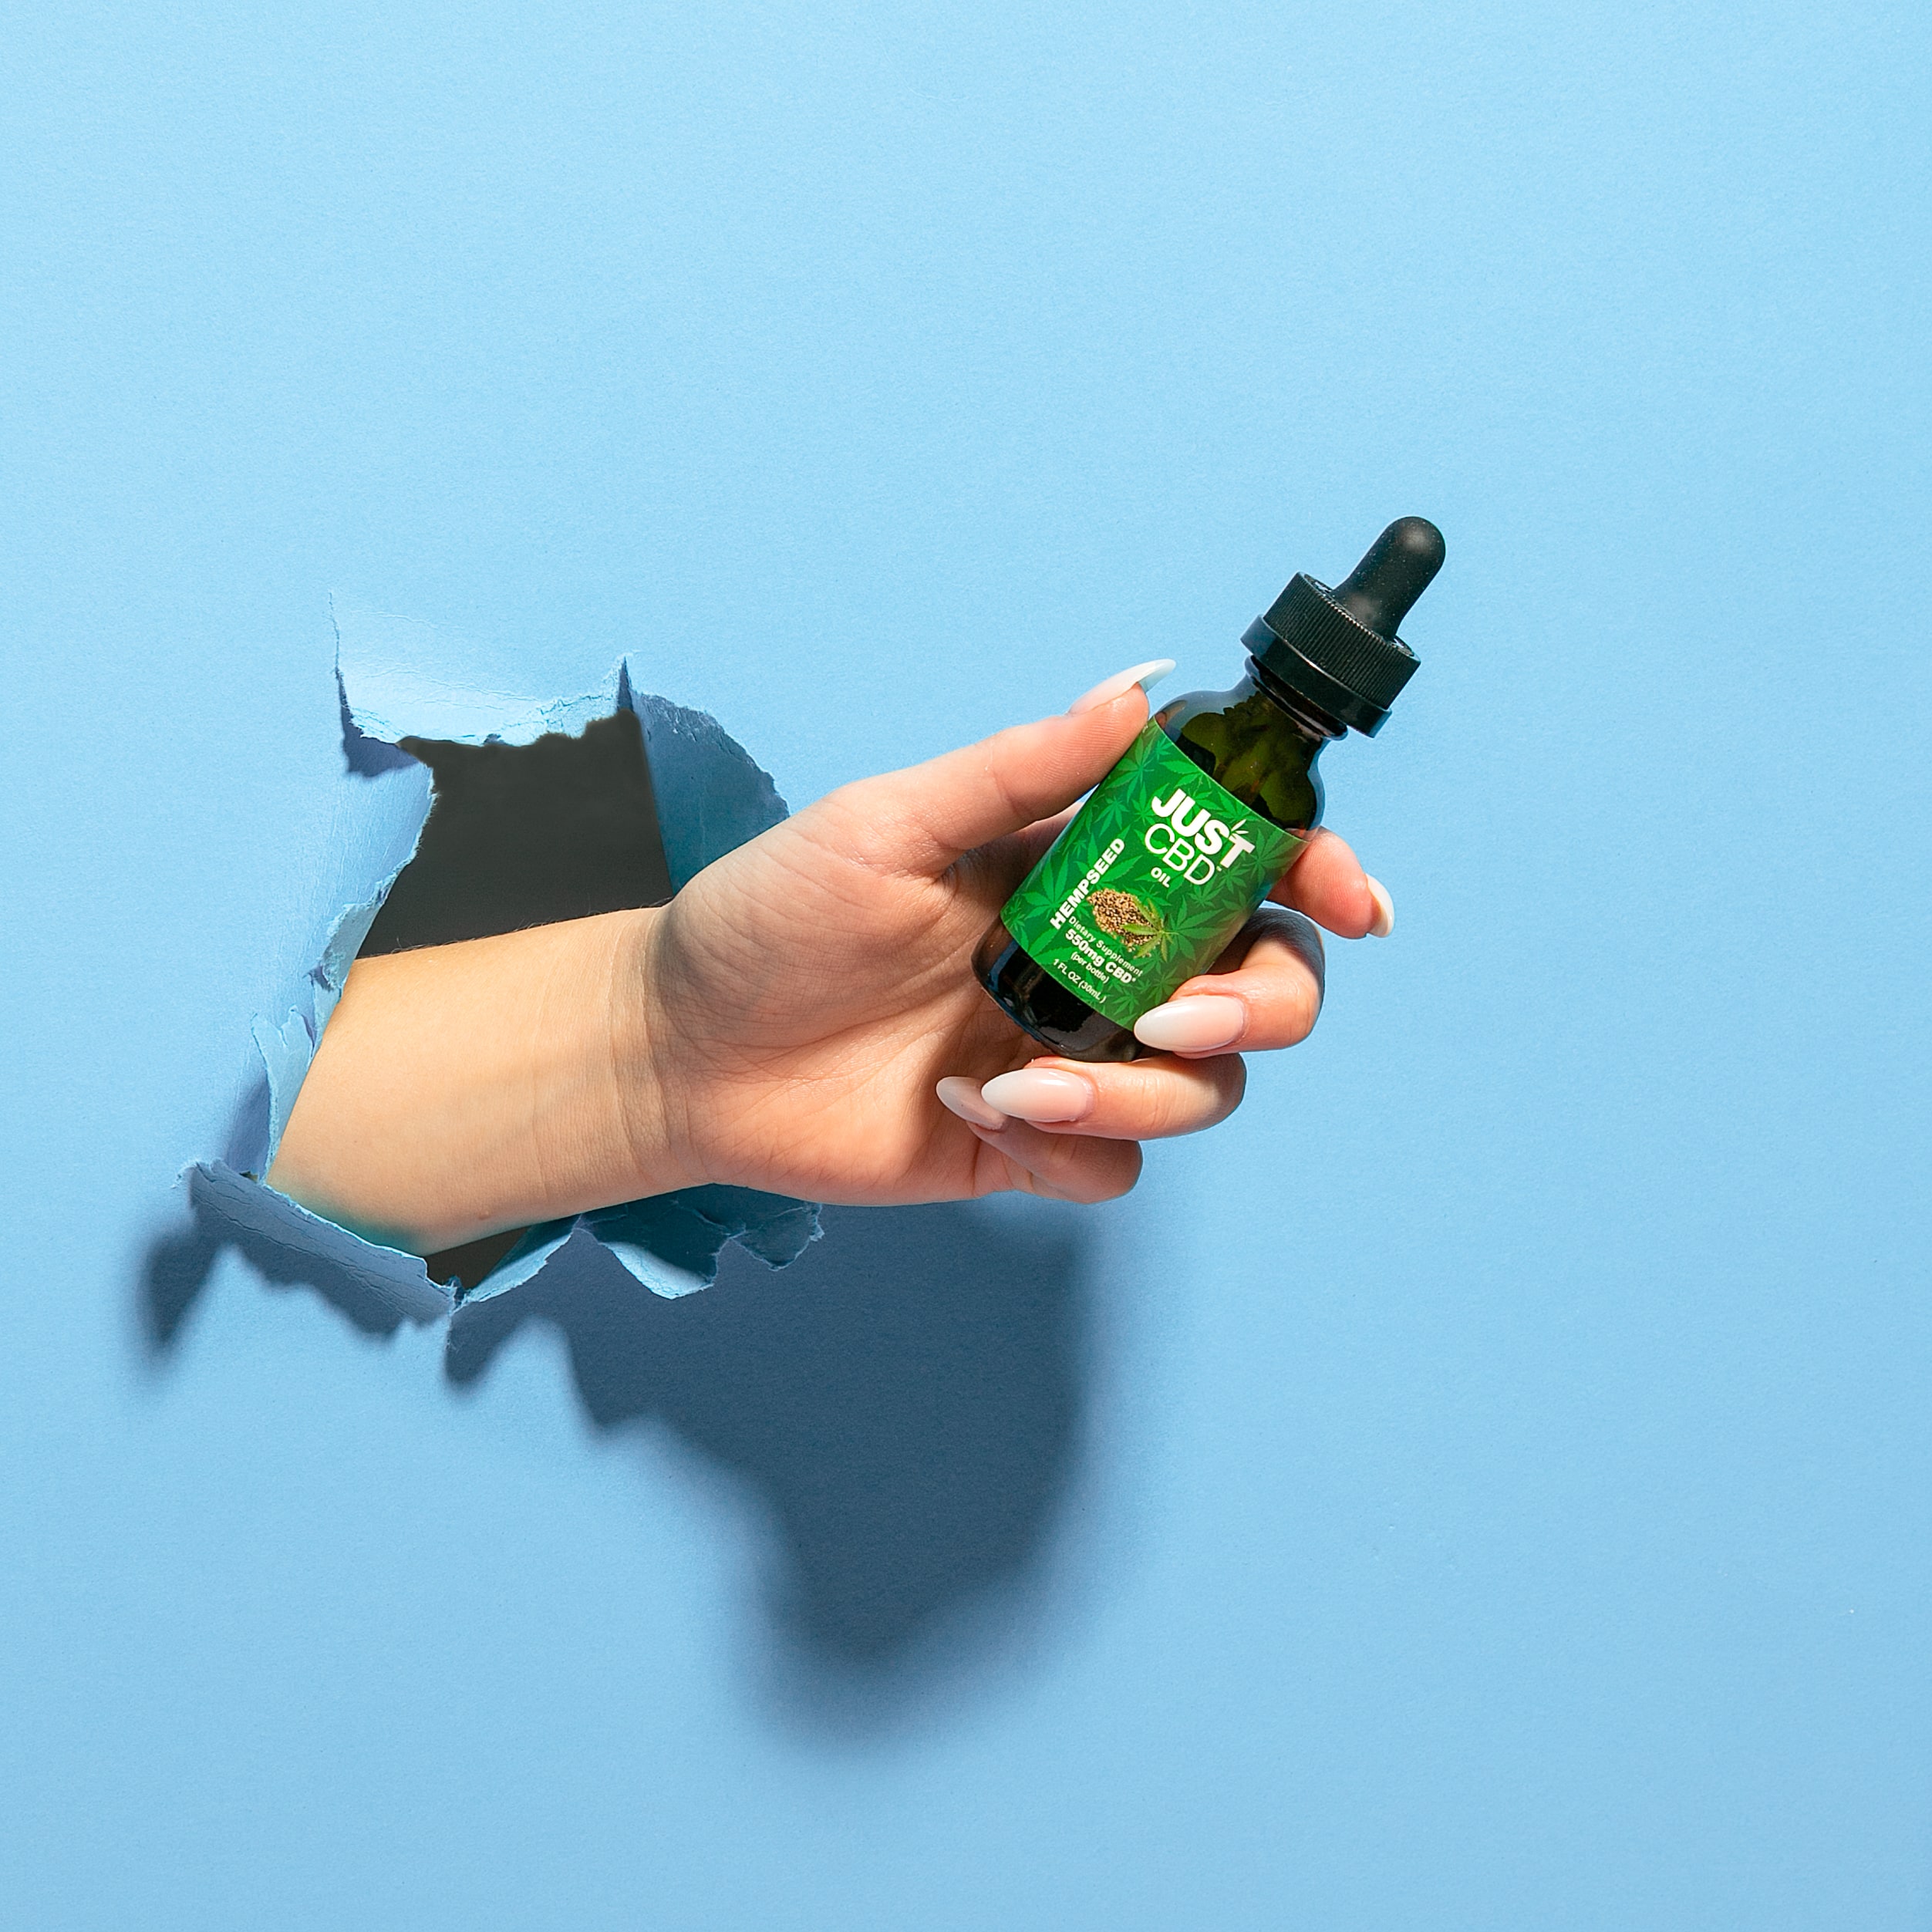 WHAT EXACTLY IS A TINCTURE OF CBD OIL